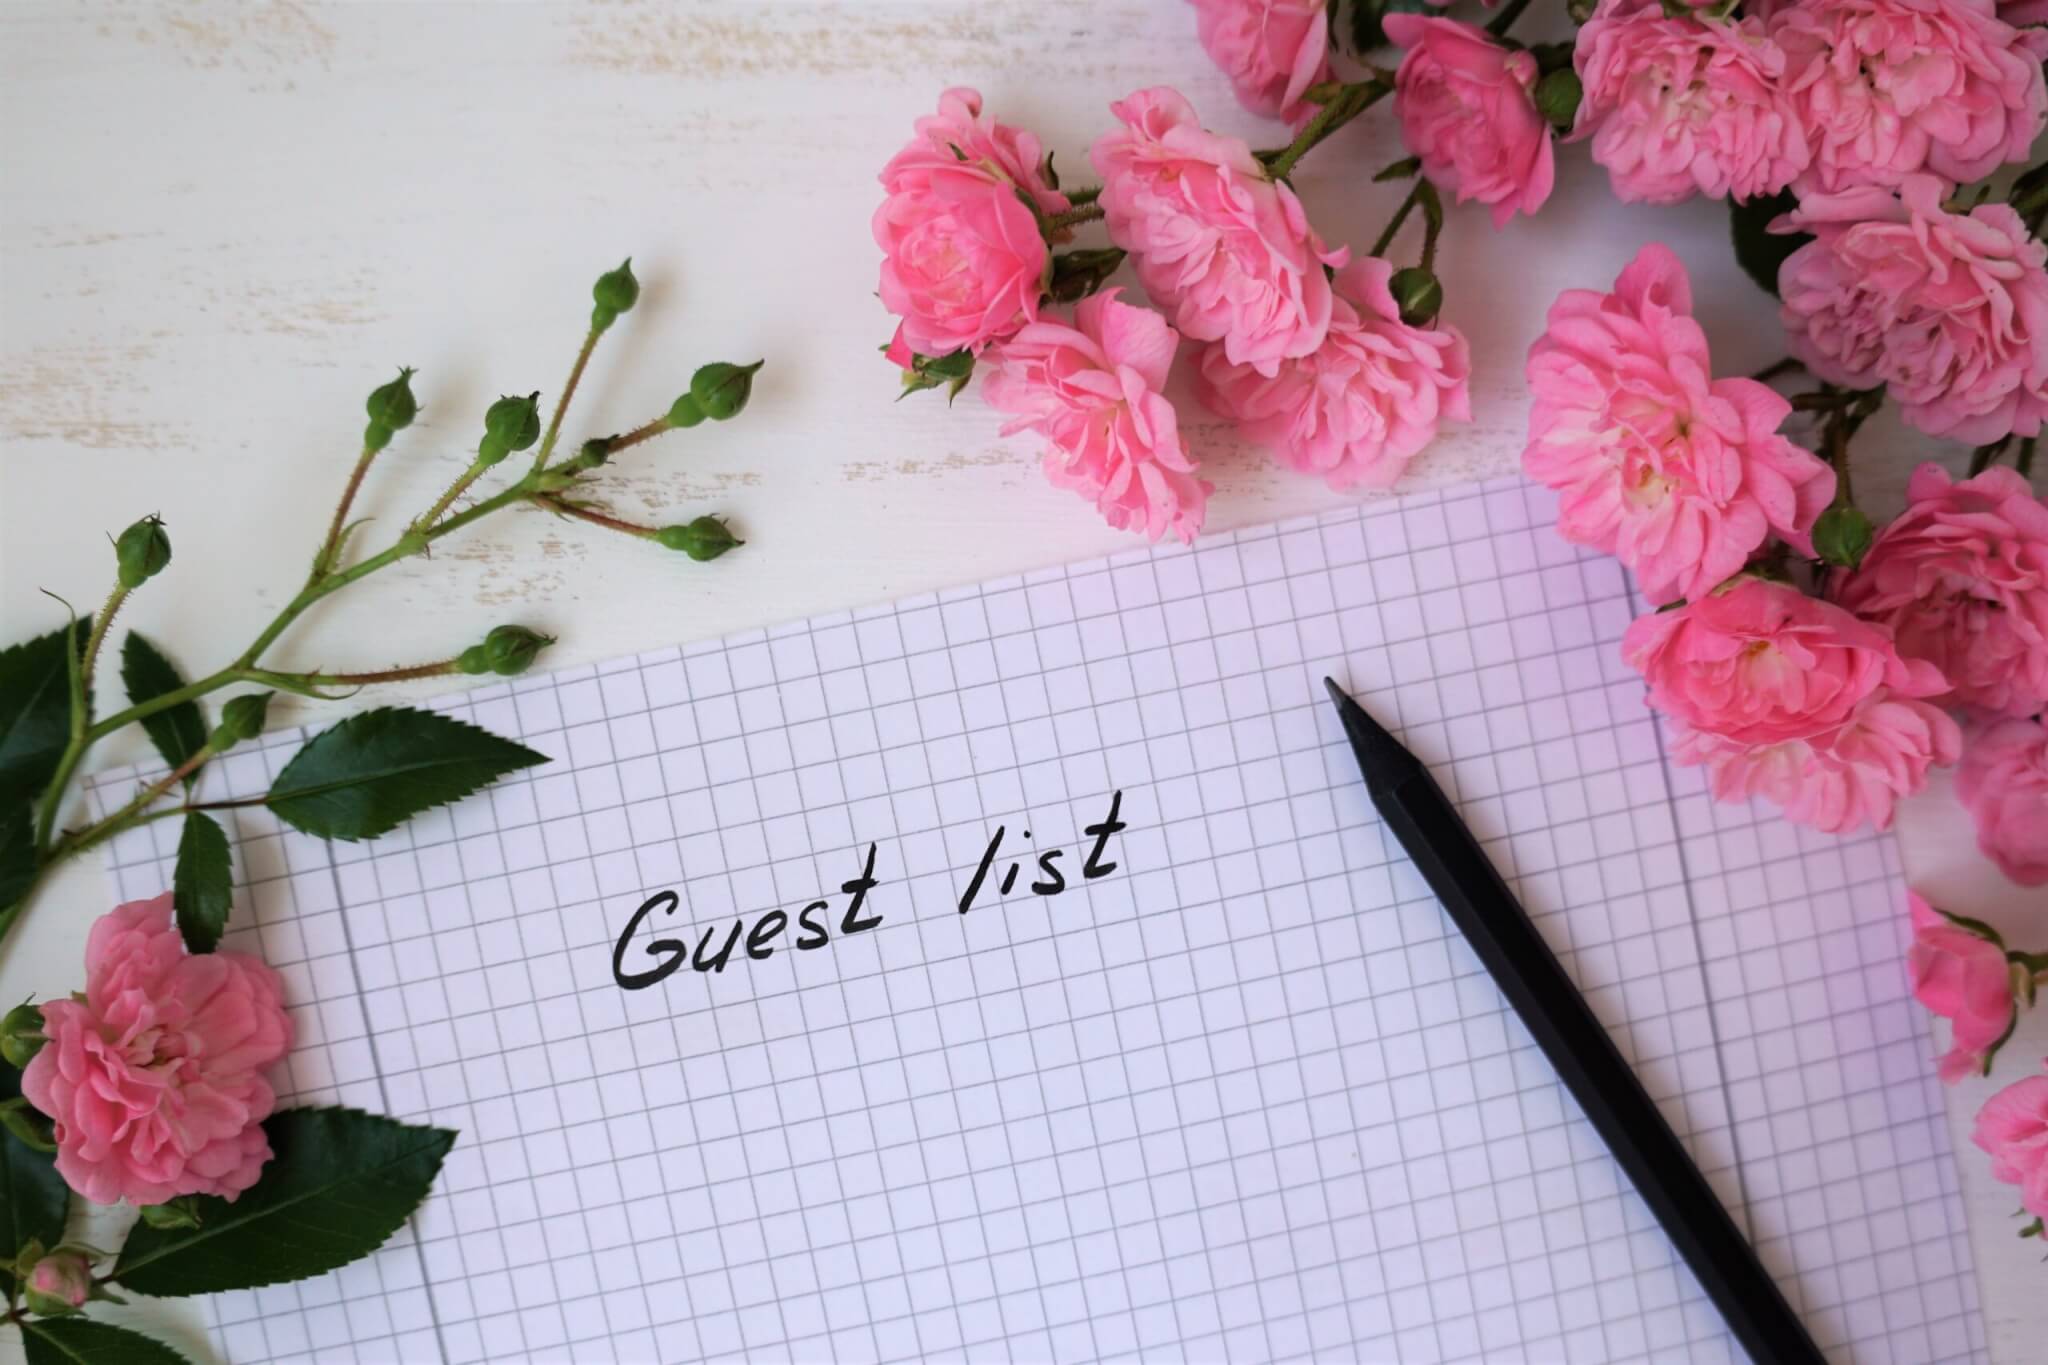 How to Cut Your Wedding Day Guest List